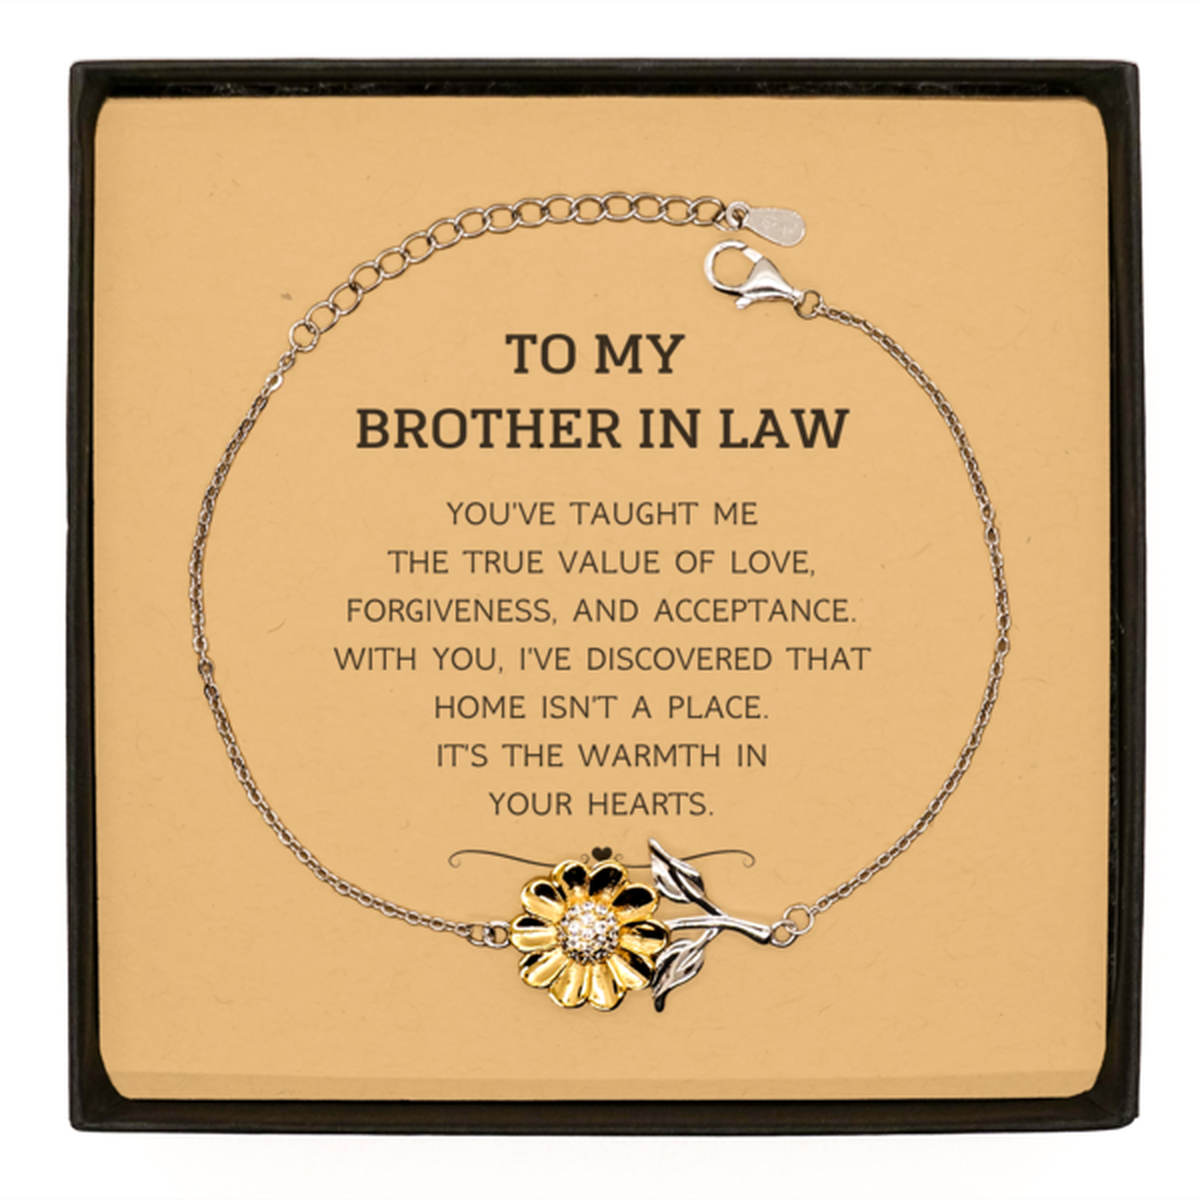 To My Brother In Law Gifts, You've taught me the true value of love, Thank You Gifts For Brother In Law, Birthday Sunflower Bracelet For Brother In Law